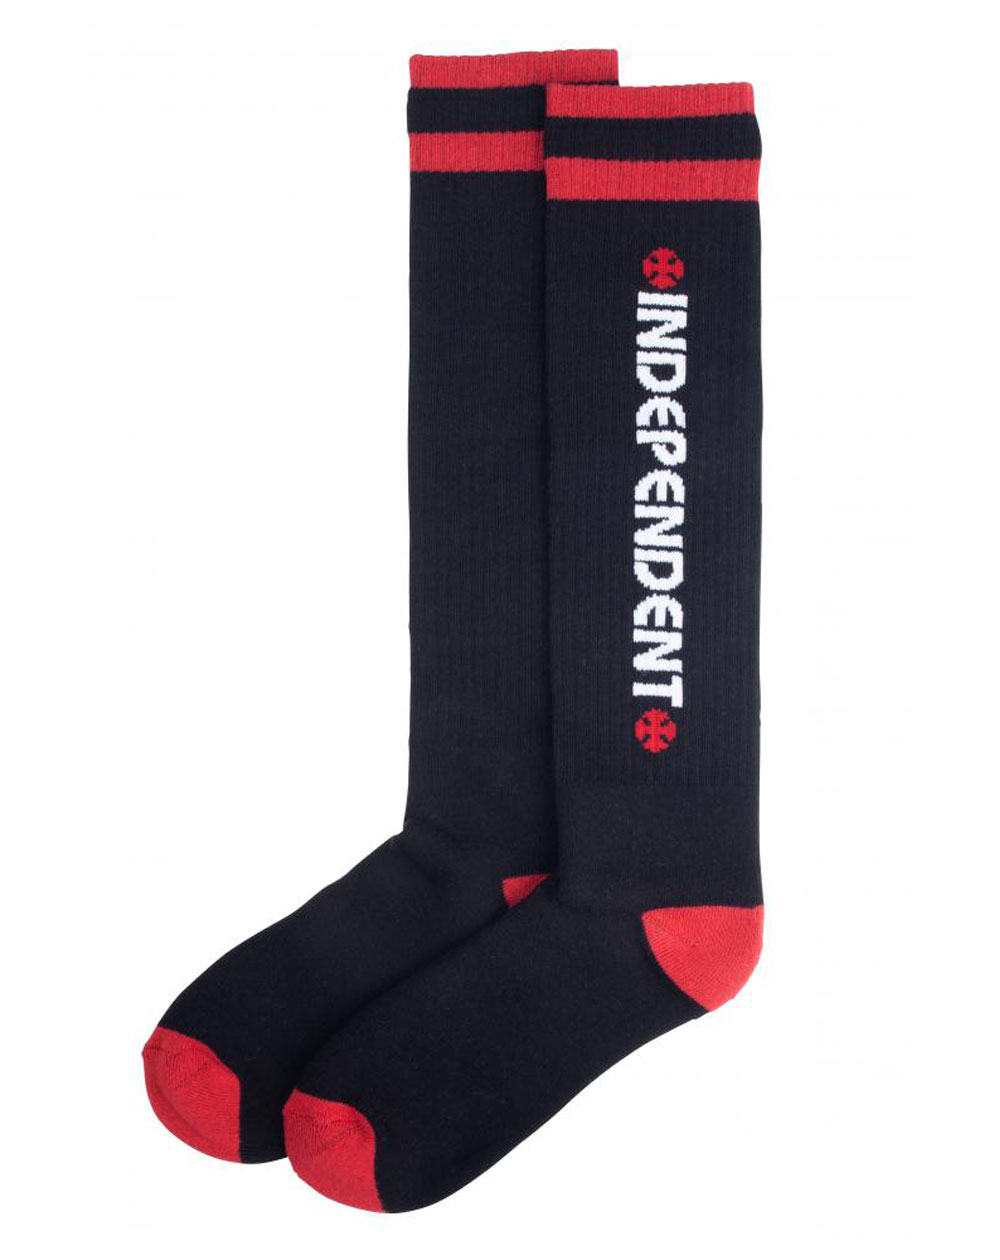 Independent Bar Tall Socquettes Homme Black